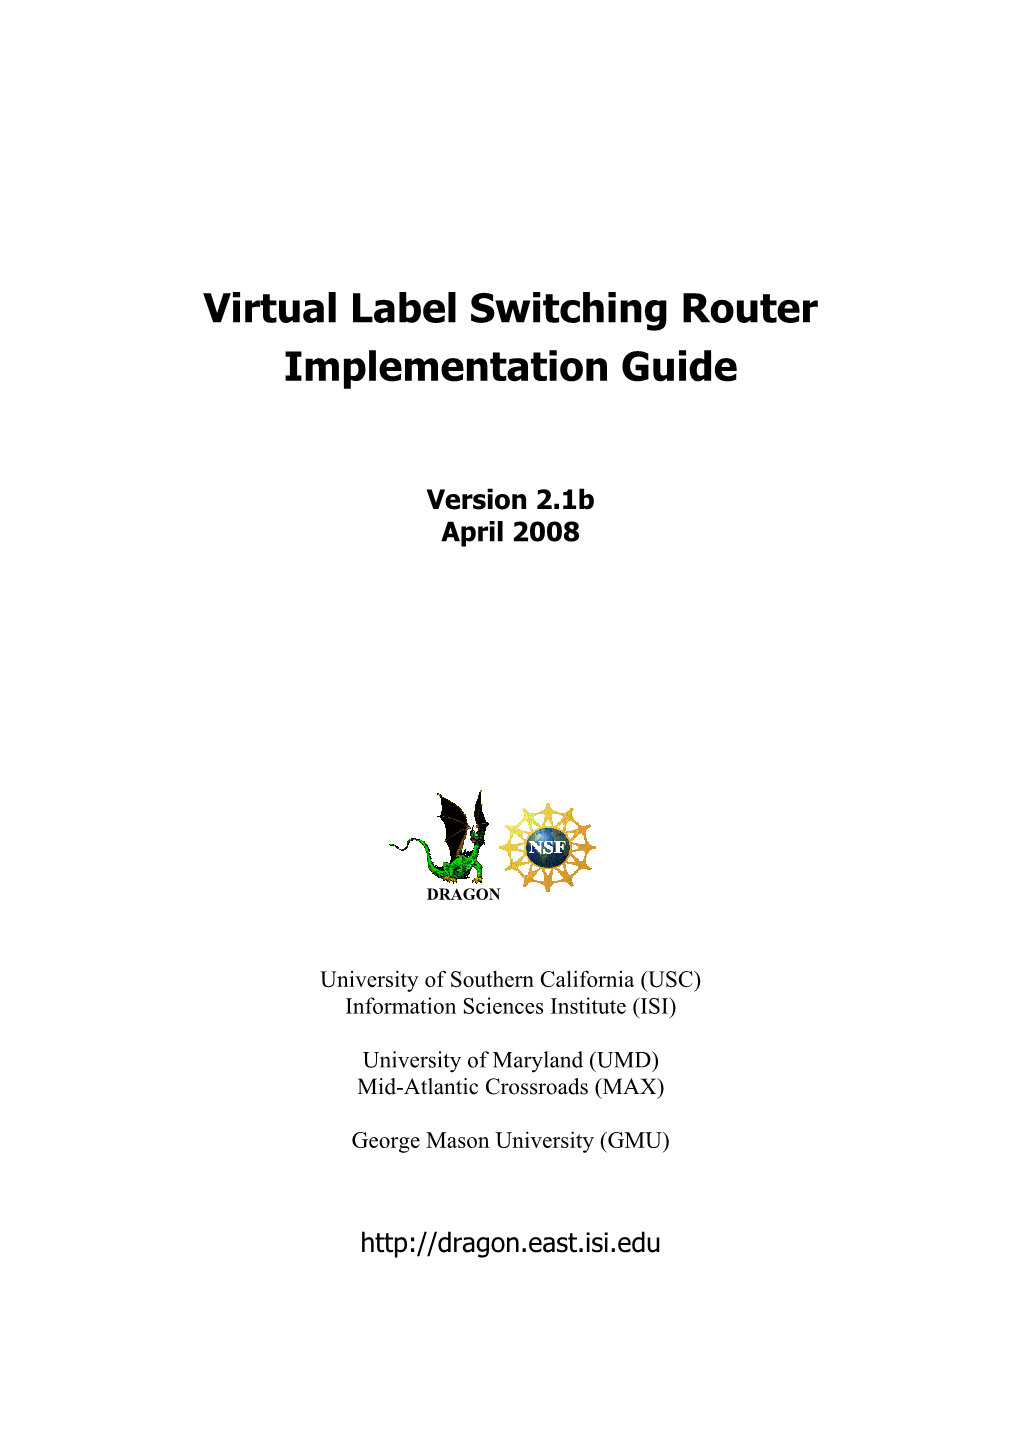 Virtual Label Switching Router Implementation Guide